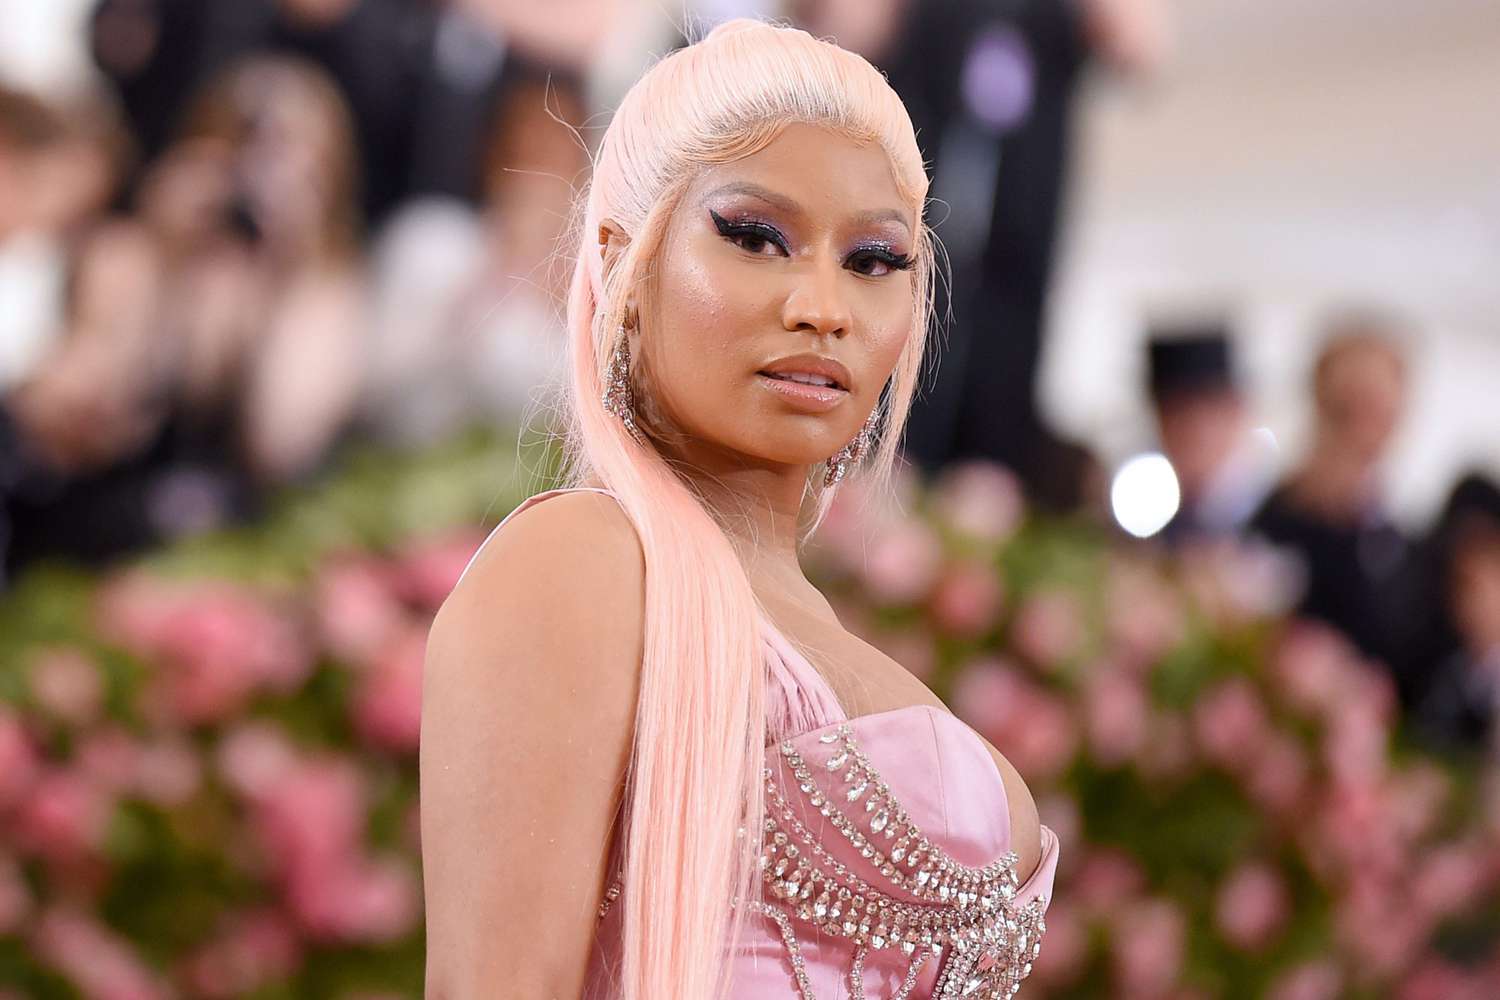 NEW YORK, NEW YORK - MAY 06: Nicki Minaj attends The 2019 Met Gala Celebrating Camp: Notes on Fashion at Metropolitan Museum of Art on May 06, 2019 in New York City. (Photo by Jamie McCarthy/Getty Images)